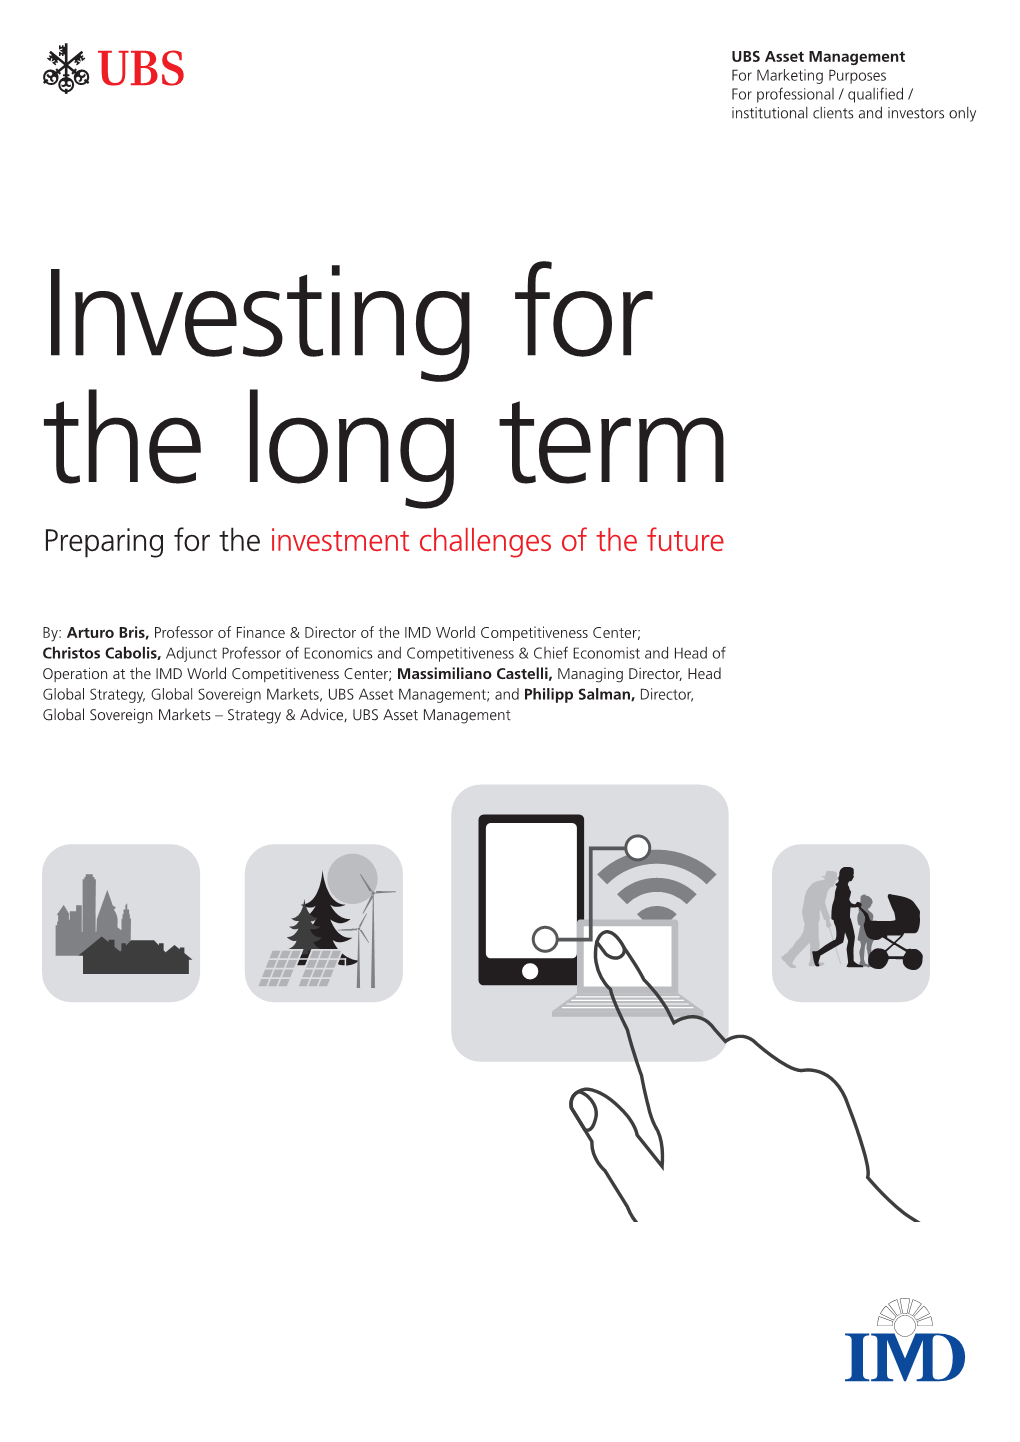 Preparing for the Investment Challenges of the Future